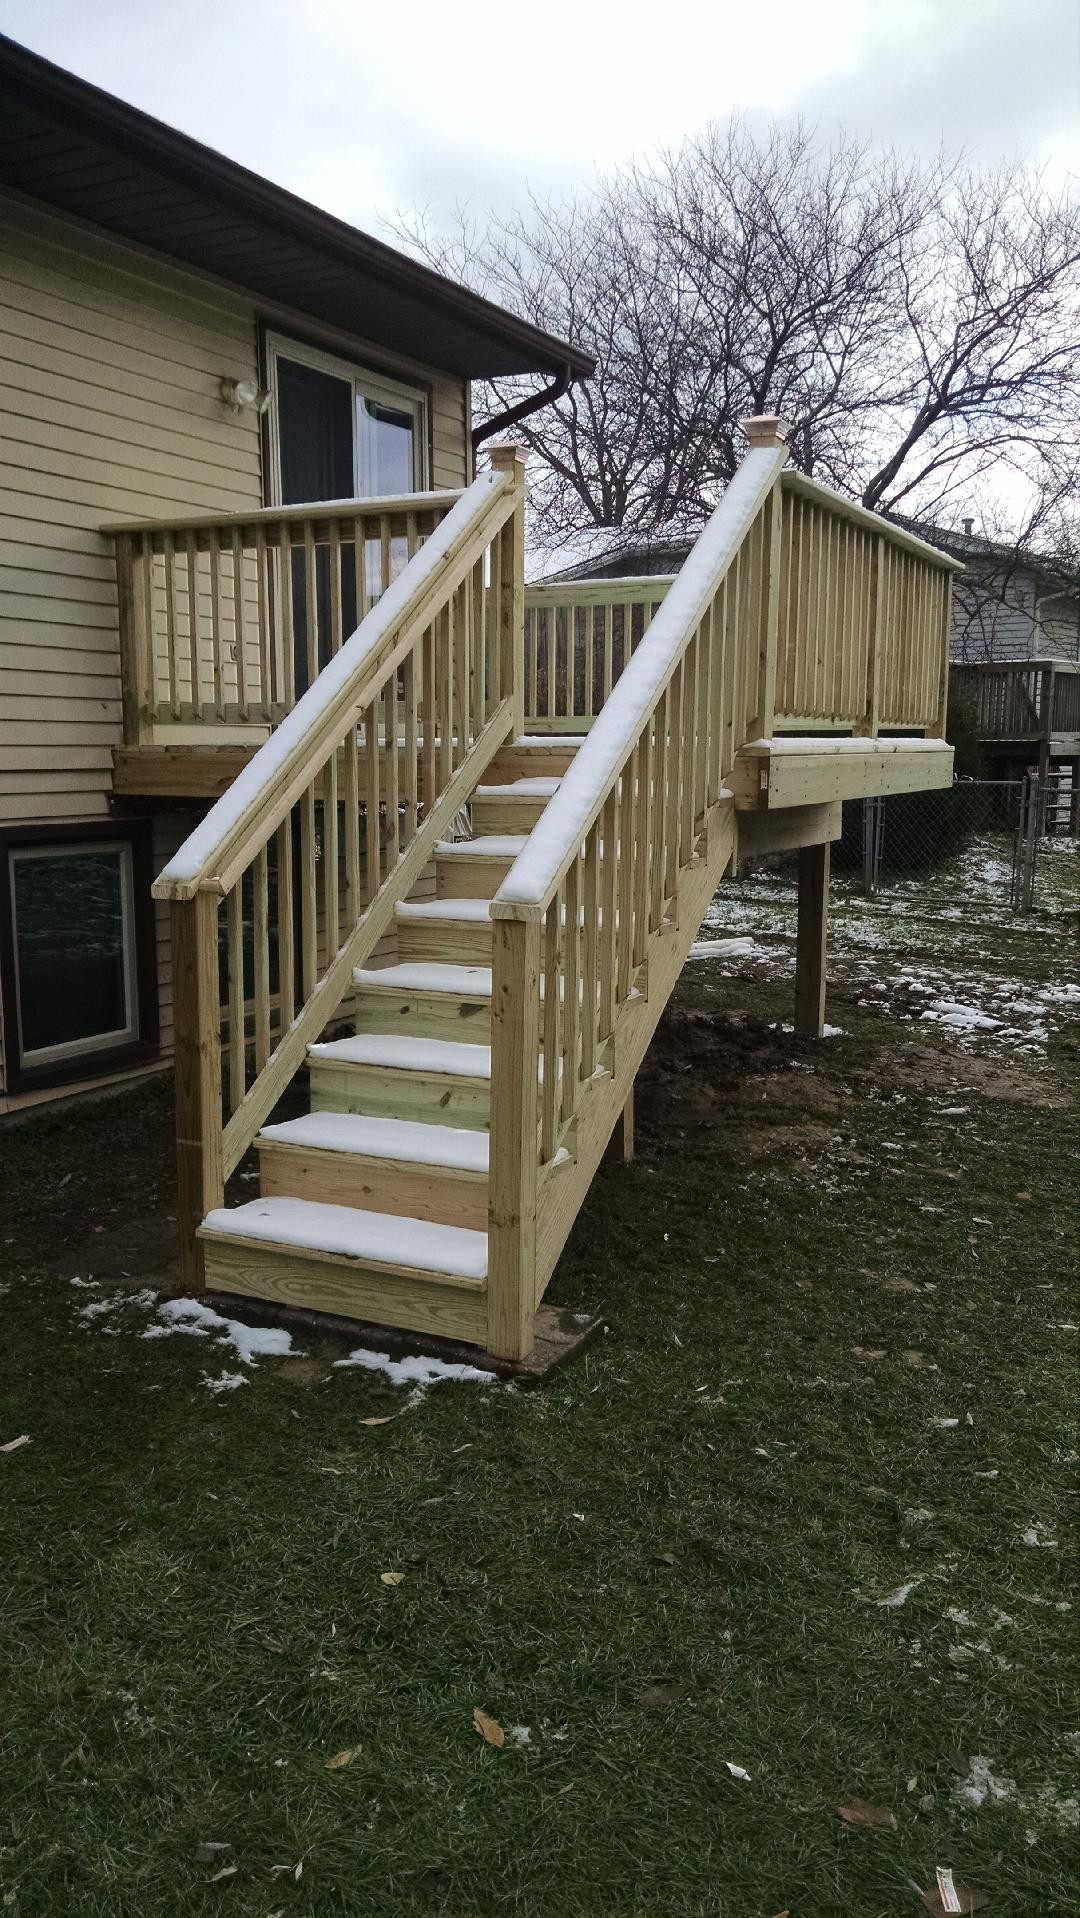 Best Deck Paint Reviews
 The 6 Best Deck Stain Reviews and Ratings